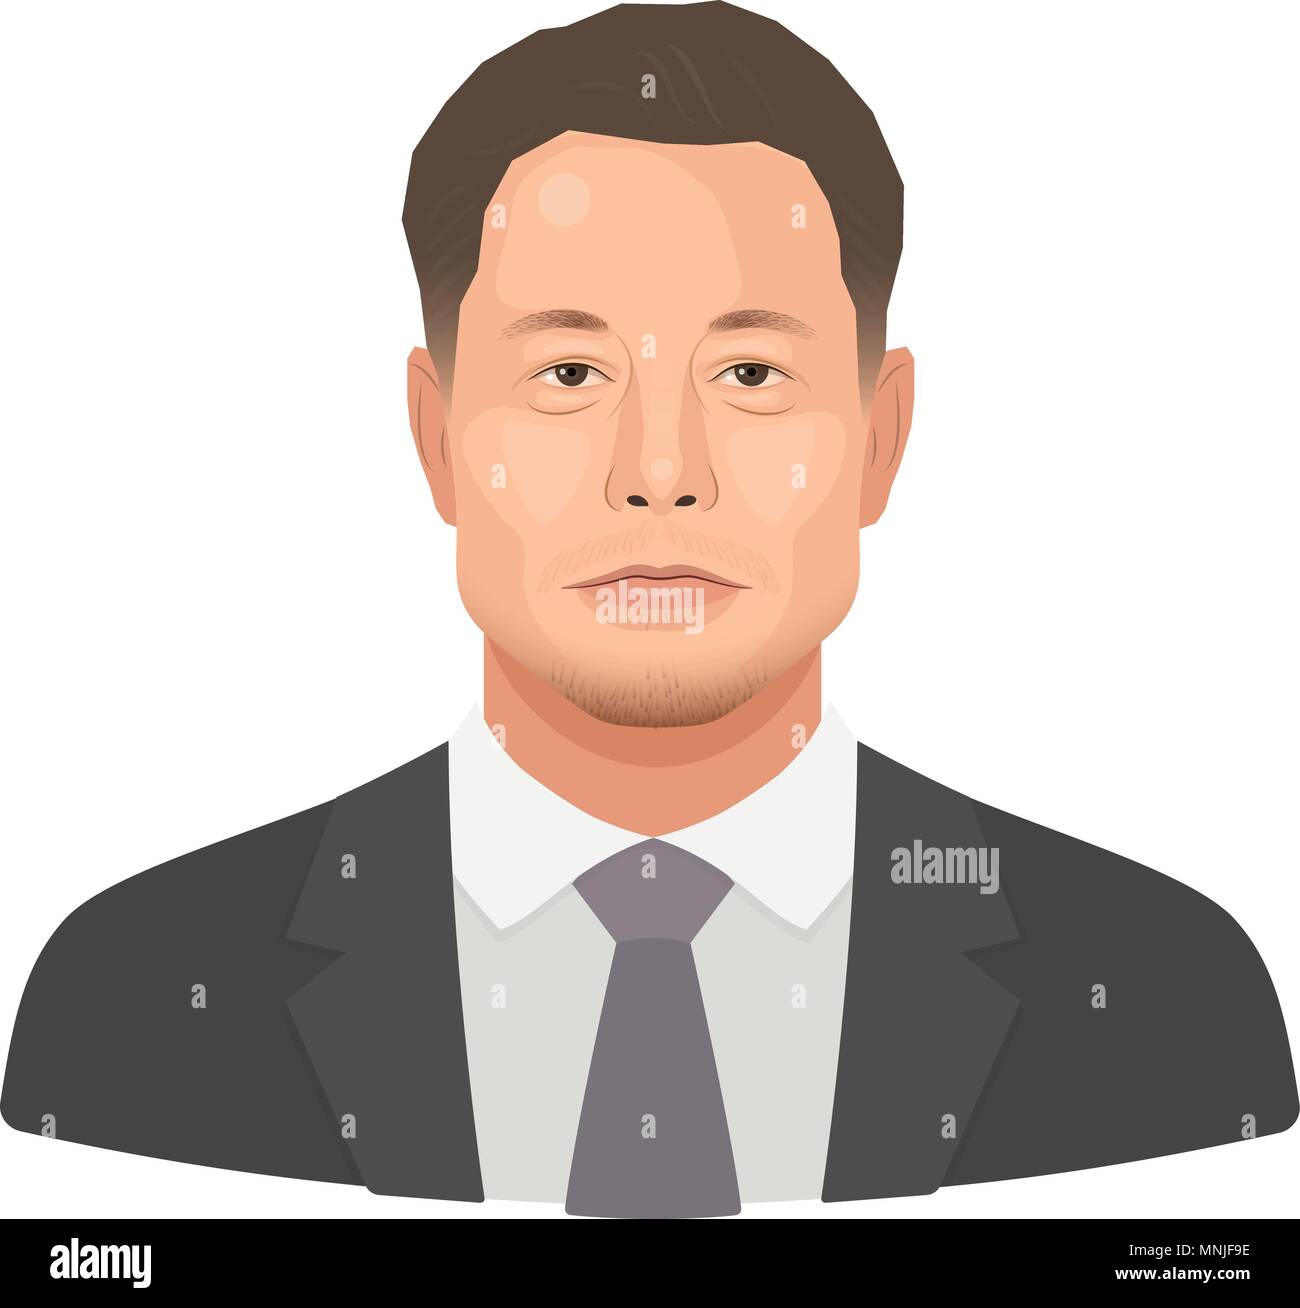 May, 2018. Elon Reeve Musk - the famous entrepreneur and founder, richest businessman. Vector flat portrait isolated on a white background. Stock Vector